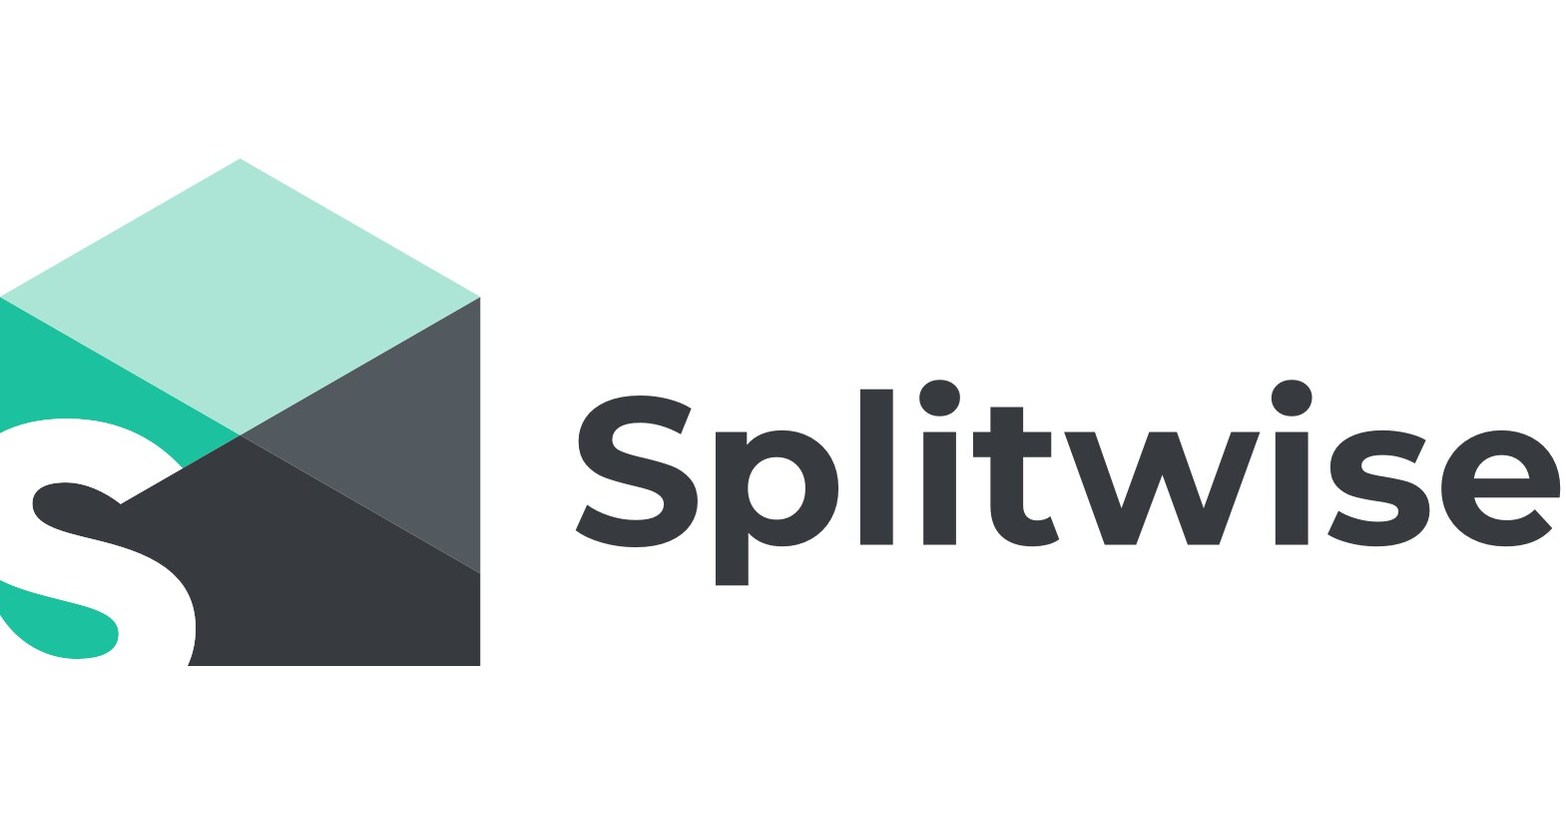 Splitwise 20m series: Splitwise raises $20M Series A to help everyone in the world